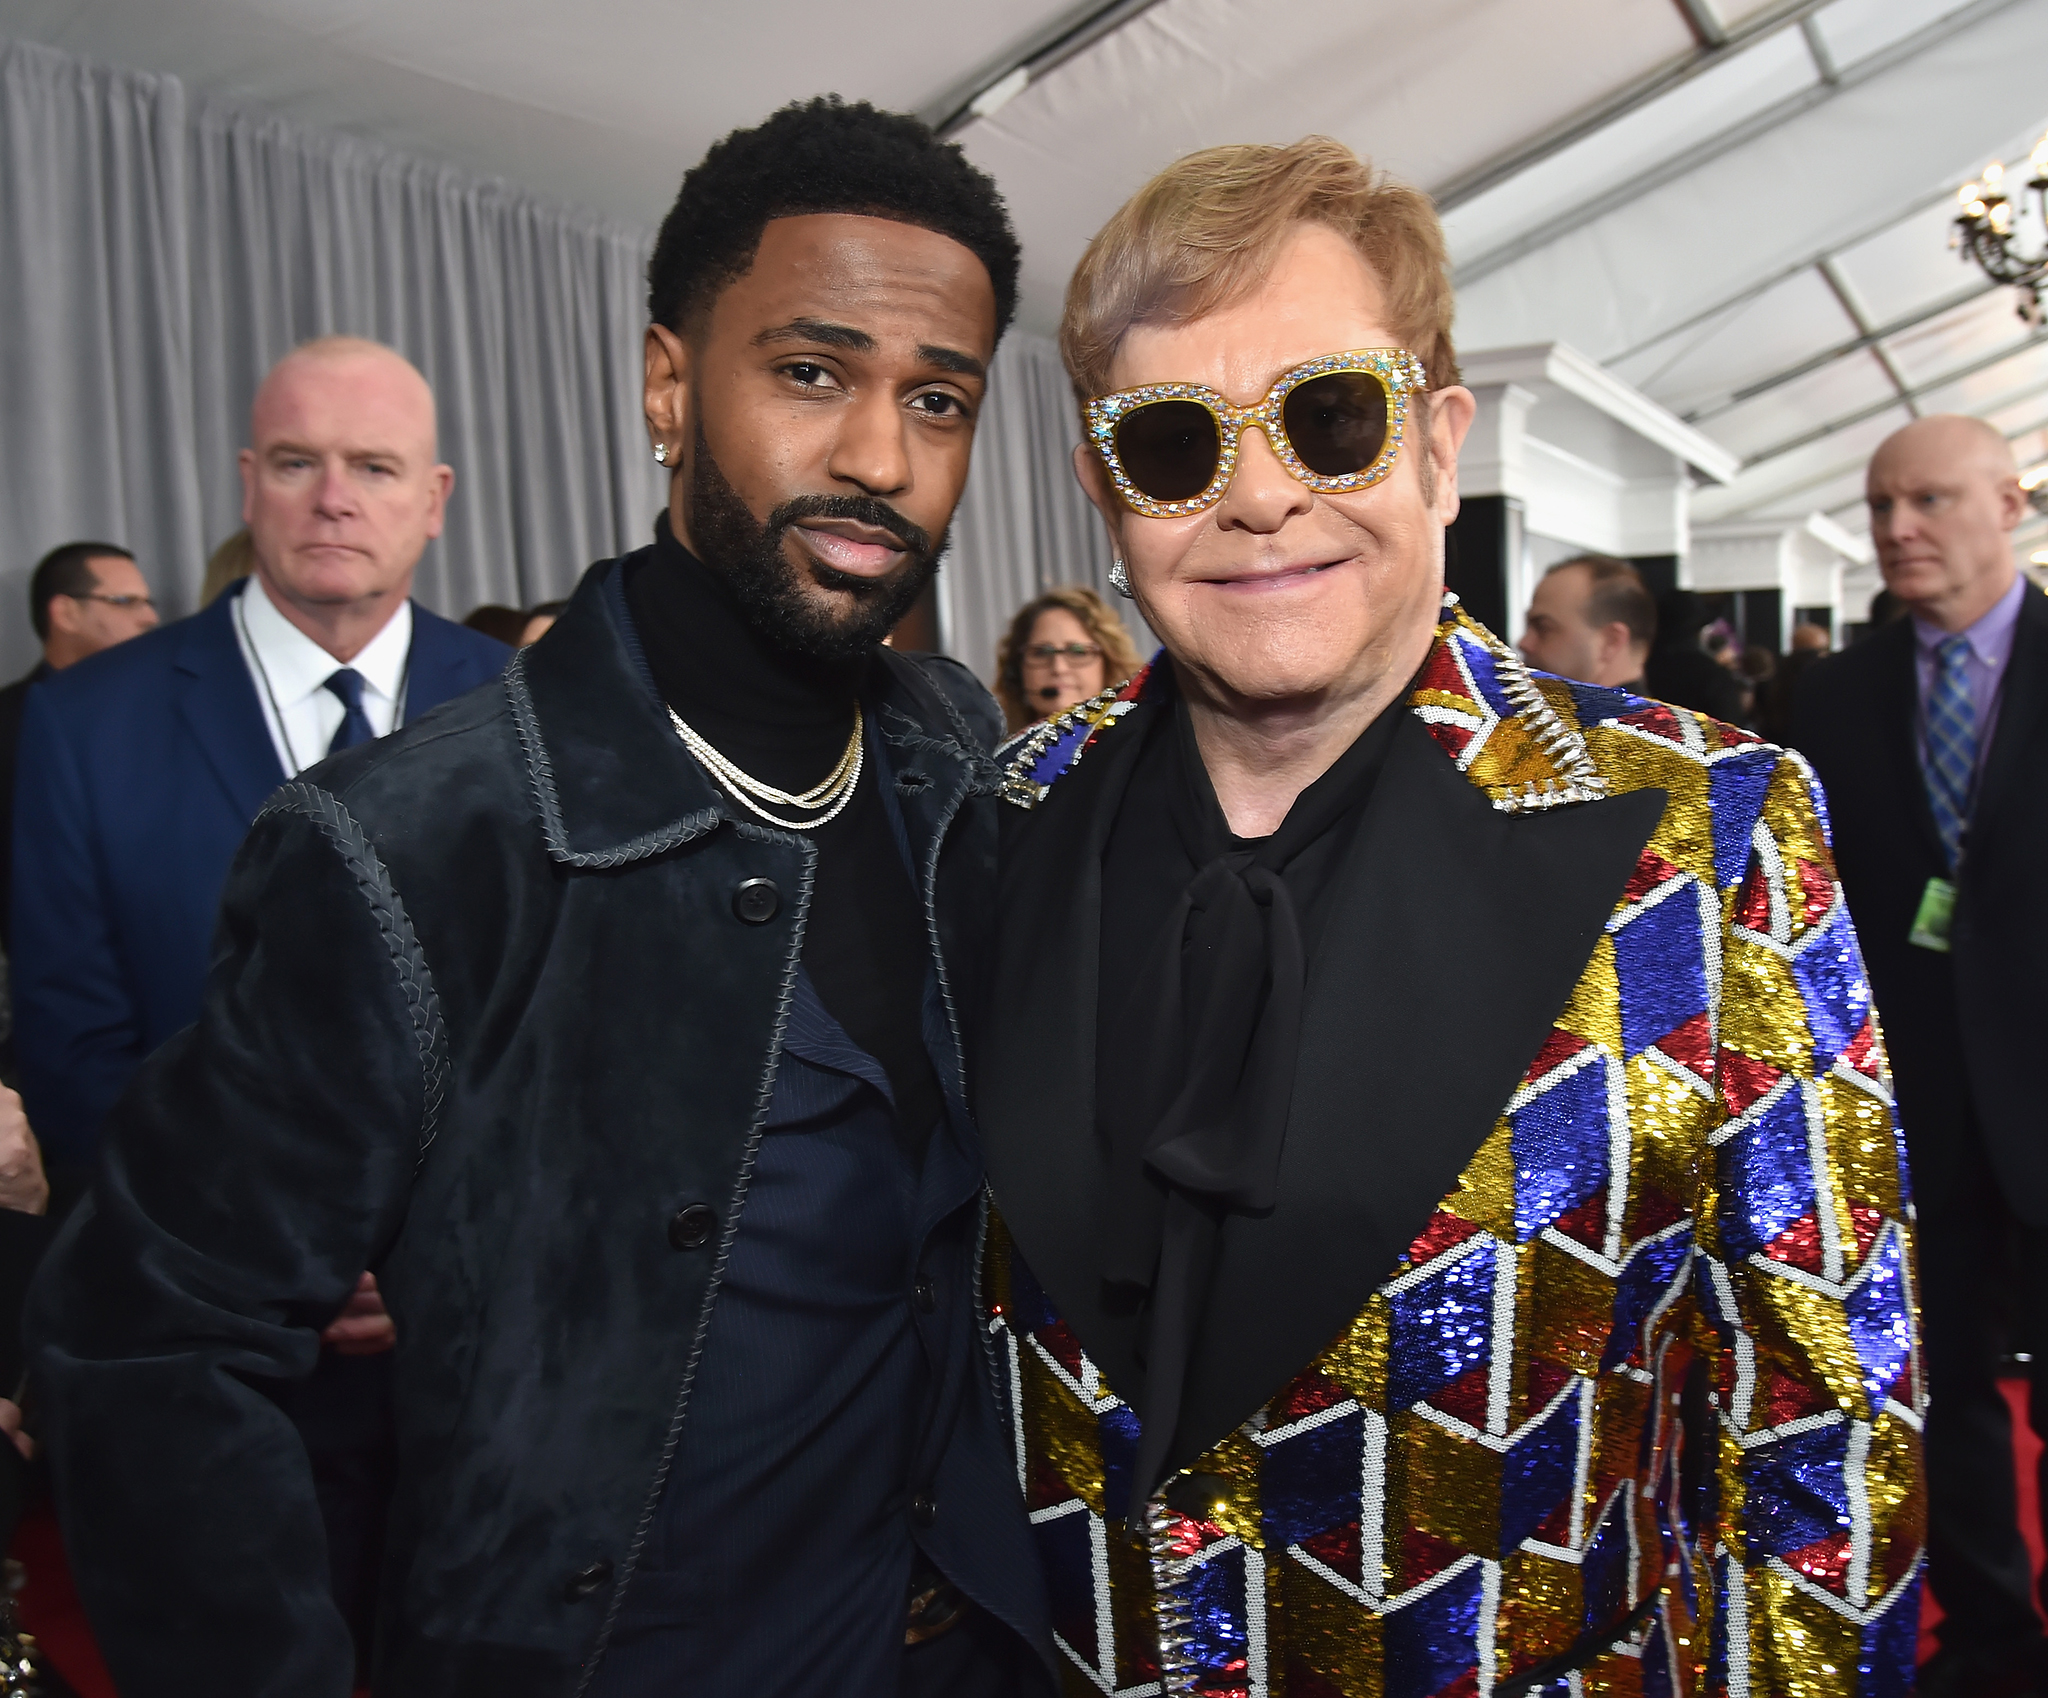 Recording artists Big Sean and Elton John attend the 60th Annual GRAMMY Awards at Madison Square Garden on January 28, 2018 in New York City.